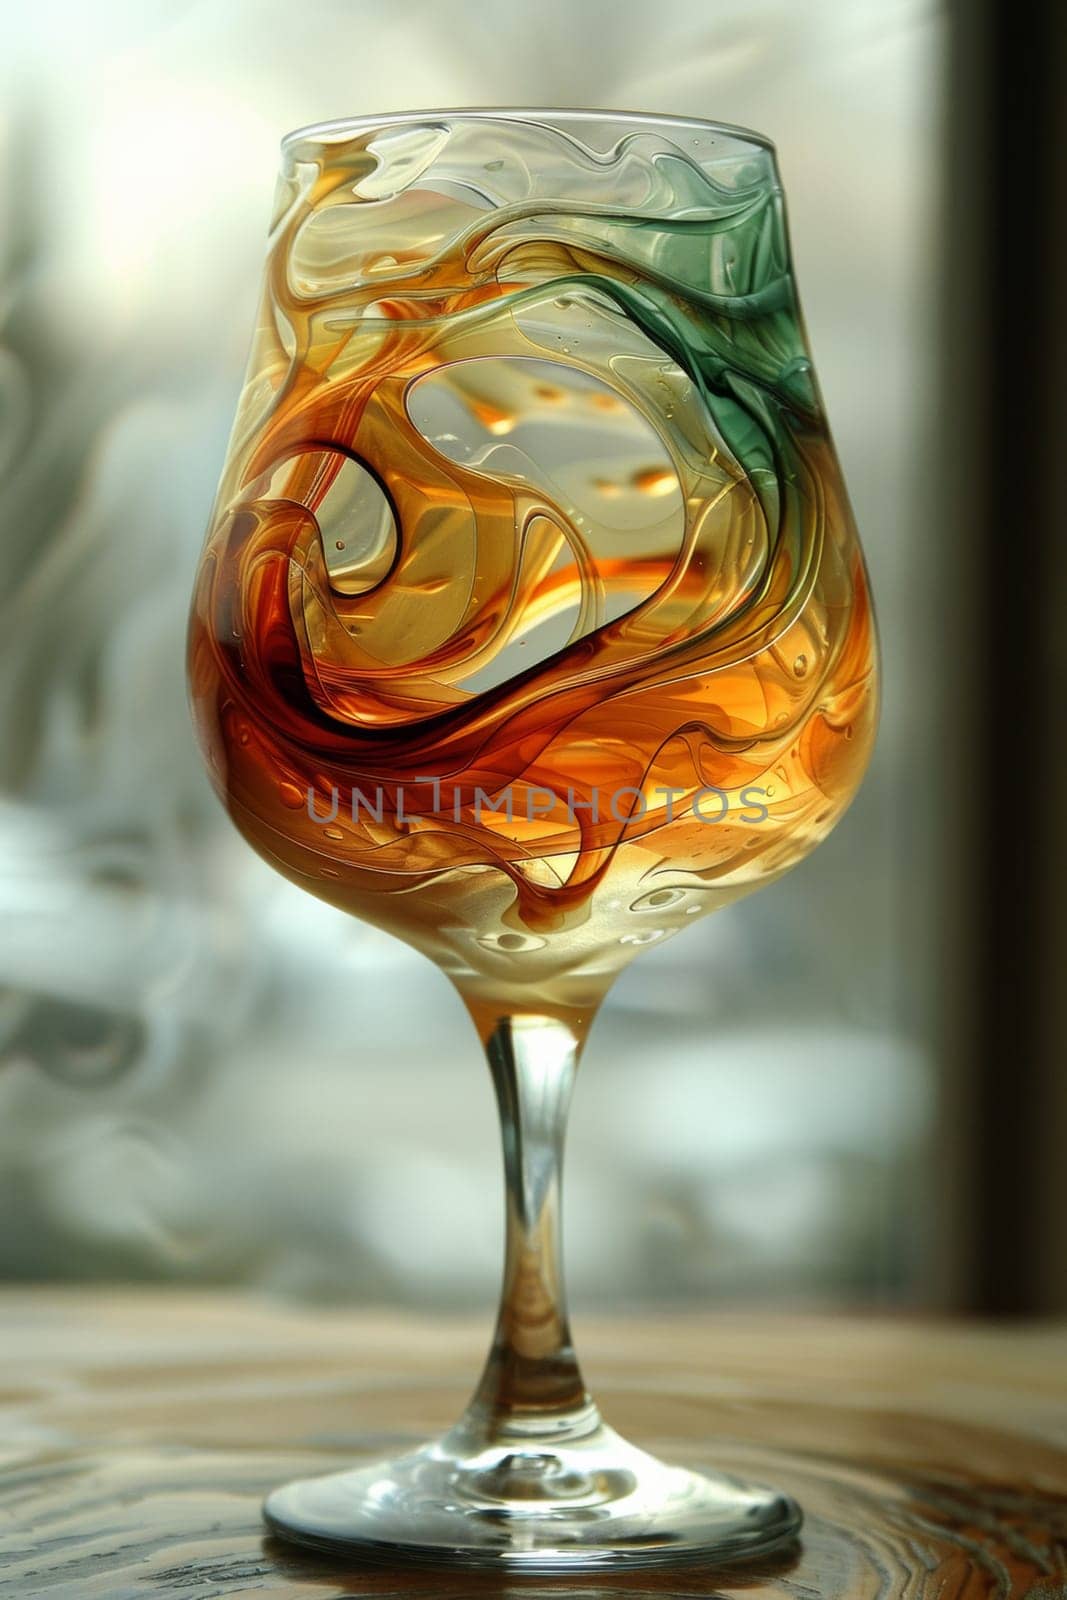 A glass of a wine glass with swirls in it on top of the table